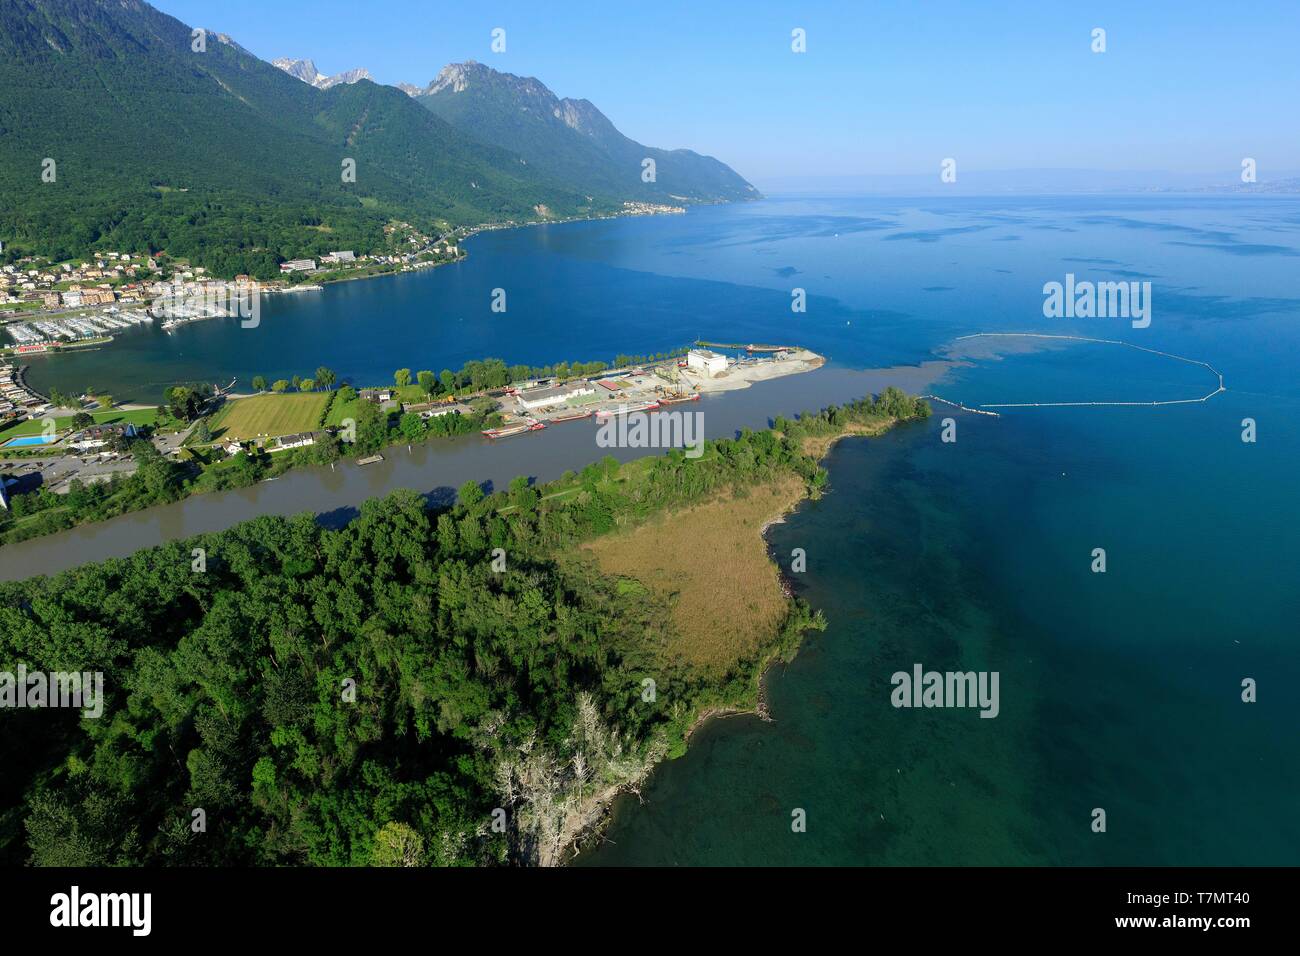 Switzerland, canton of Vaud district of Aigle and canton of Valais, district of Monthey, Lake Geneva, mouth of the Rhone, Port Valais on the left (aerial view) Stock Photo